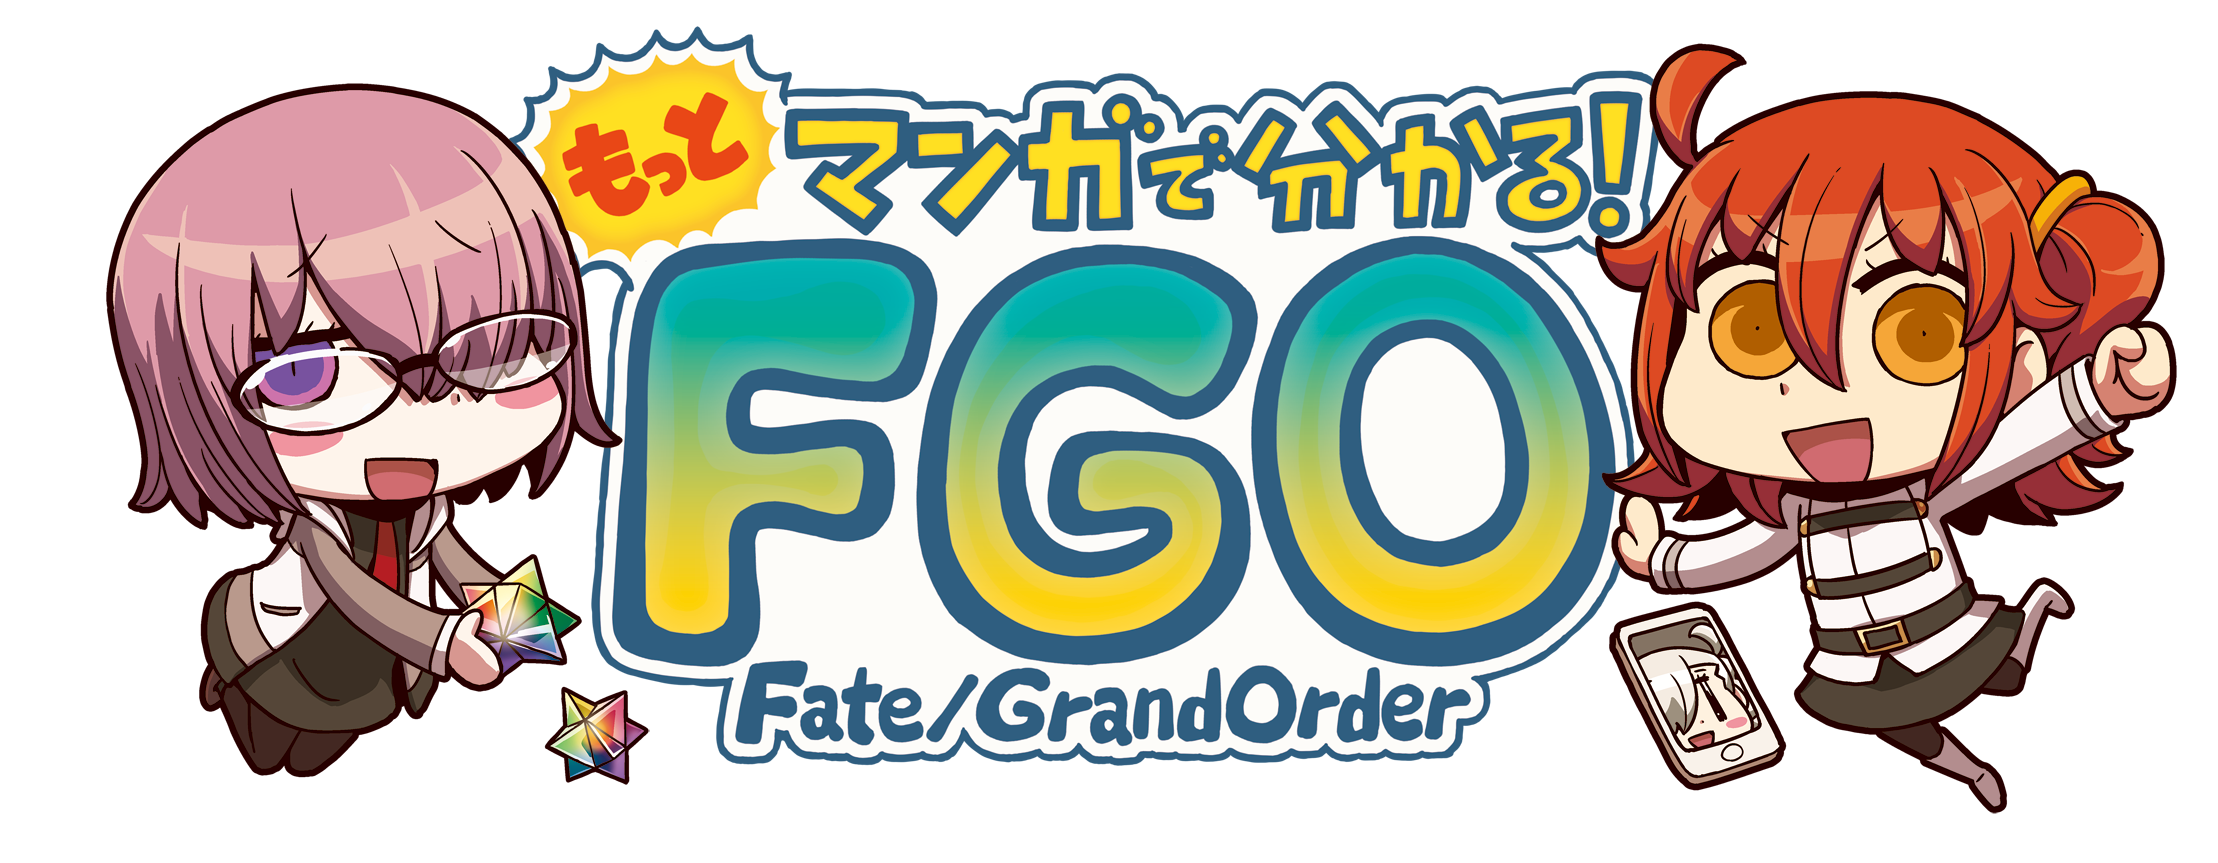 Type Moon Fgo Project Fate Grand Order 公式サイトの もっとマンガで分かる Fate Grand の第2話を更新 Social Game Info